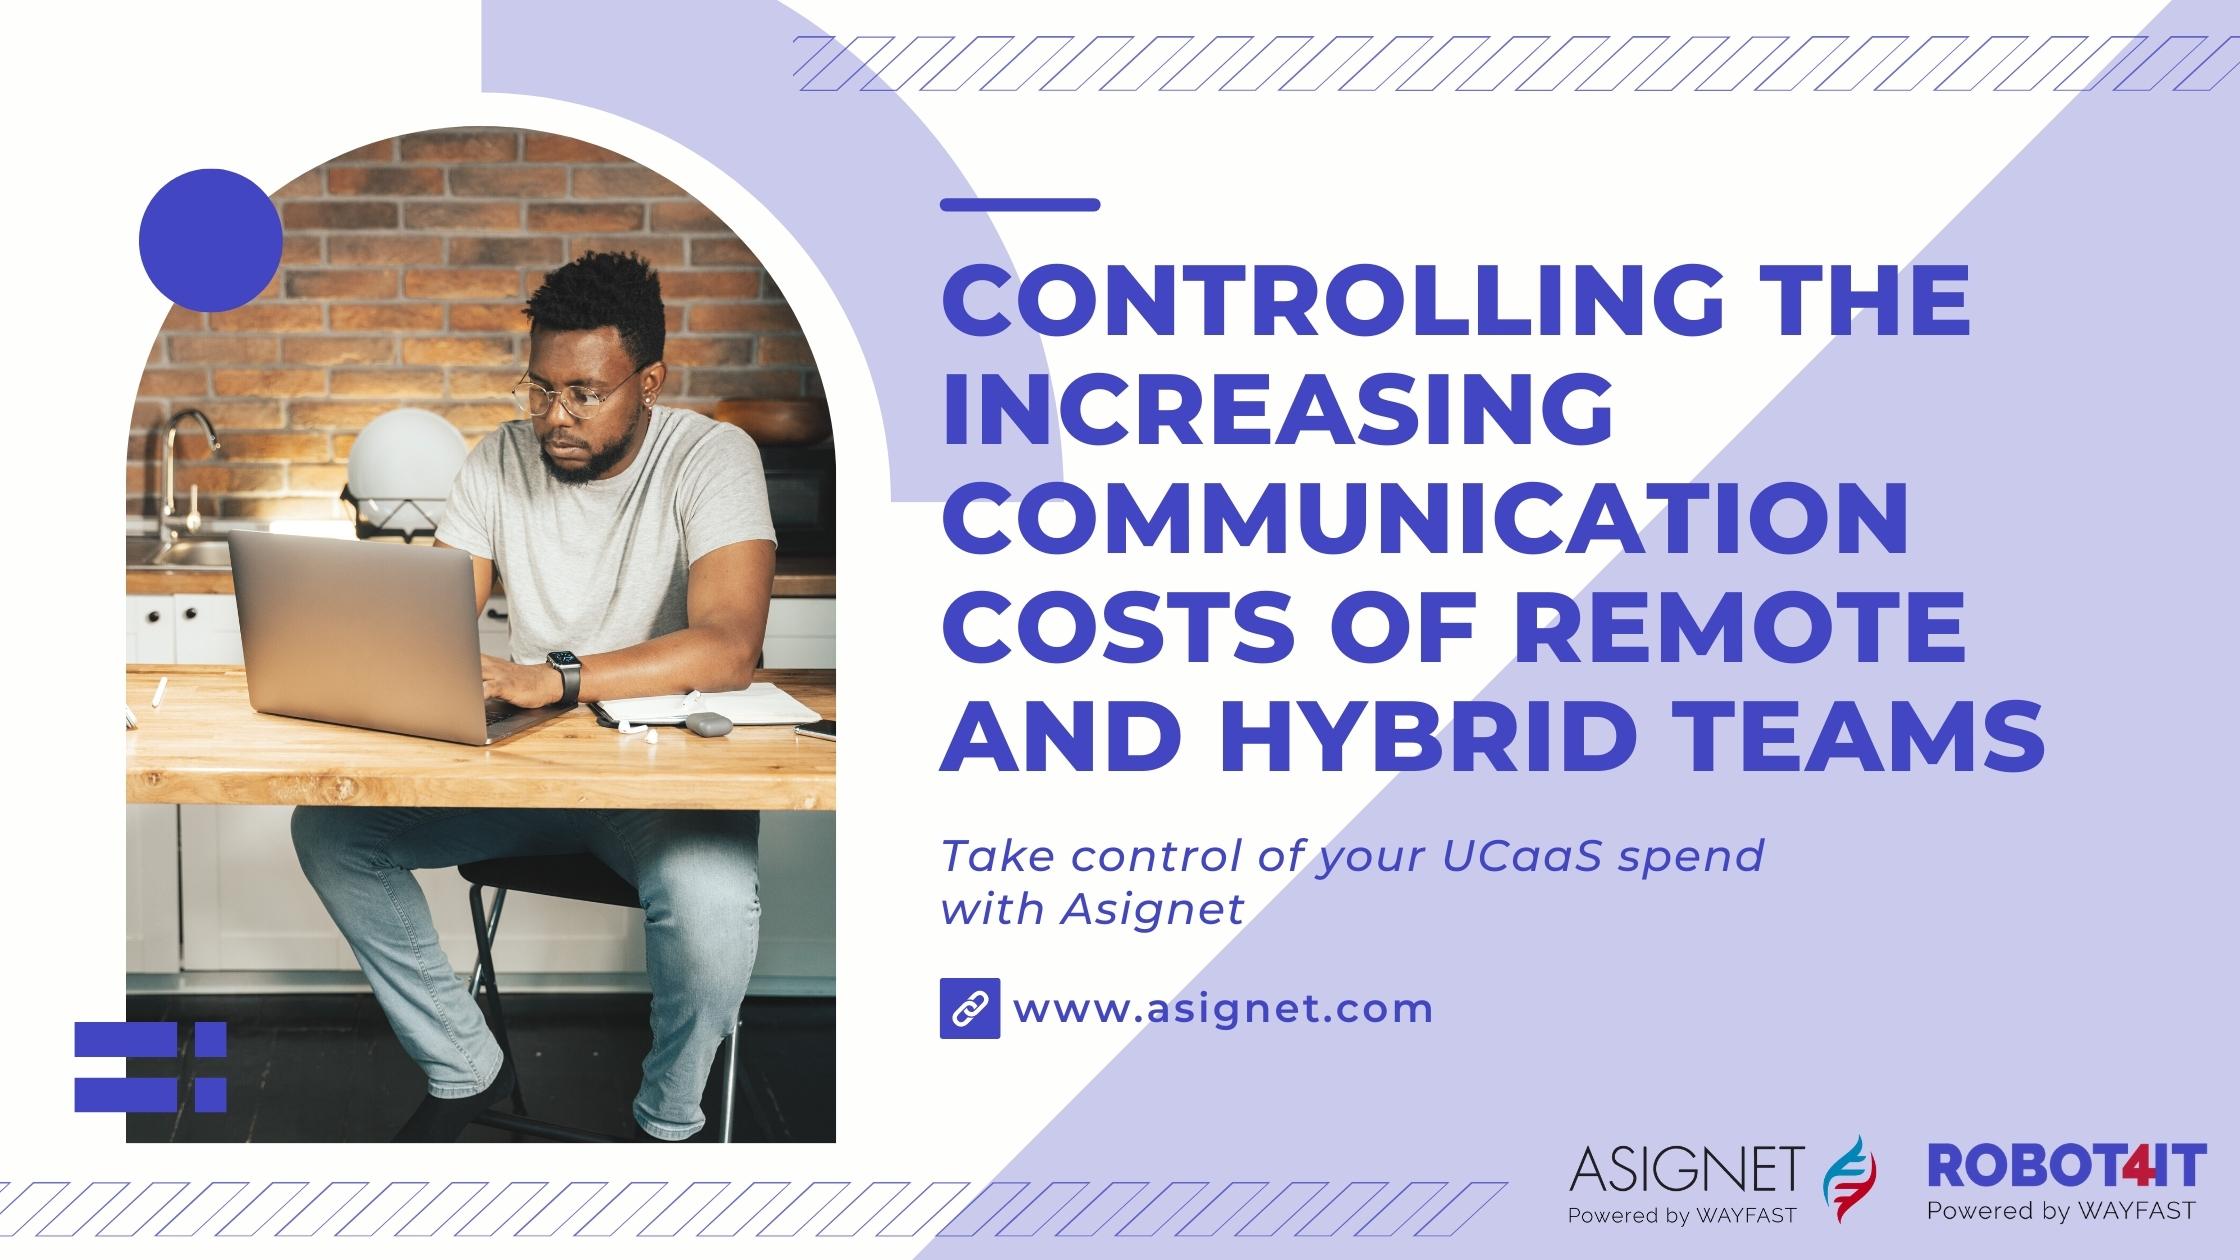 Controlling the Increasing Communication Costs of Remote and Hybrid Teams. Take control of your UCaaS spend with Asignet